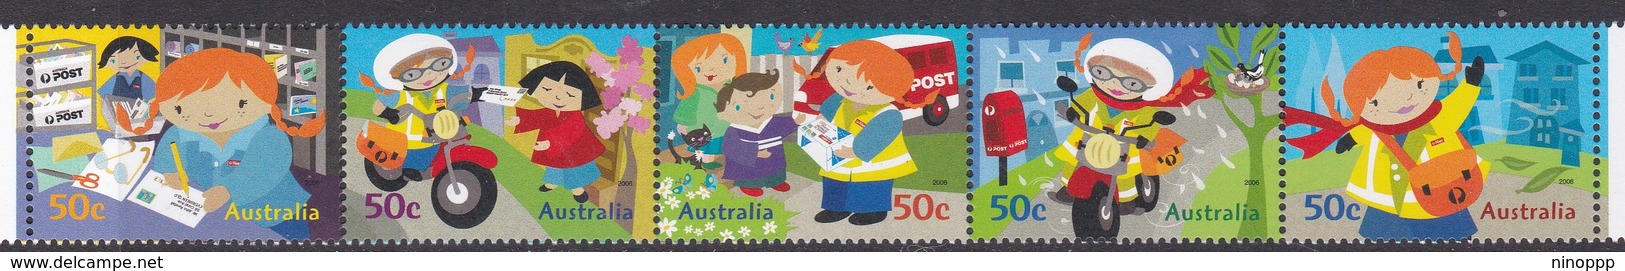 Australia ASC 2371-2375 2006 Postie Kate, Mint Never Hinged - Mint Stamps